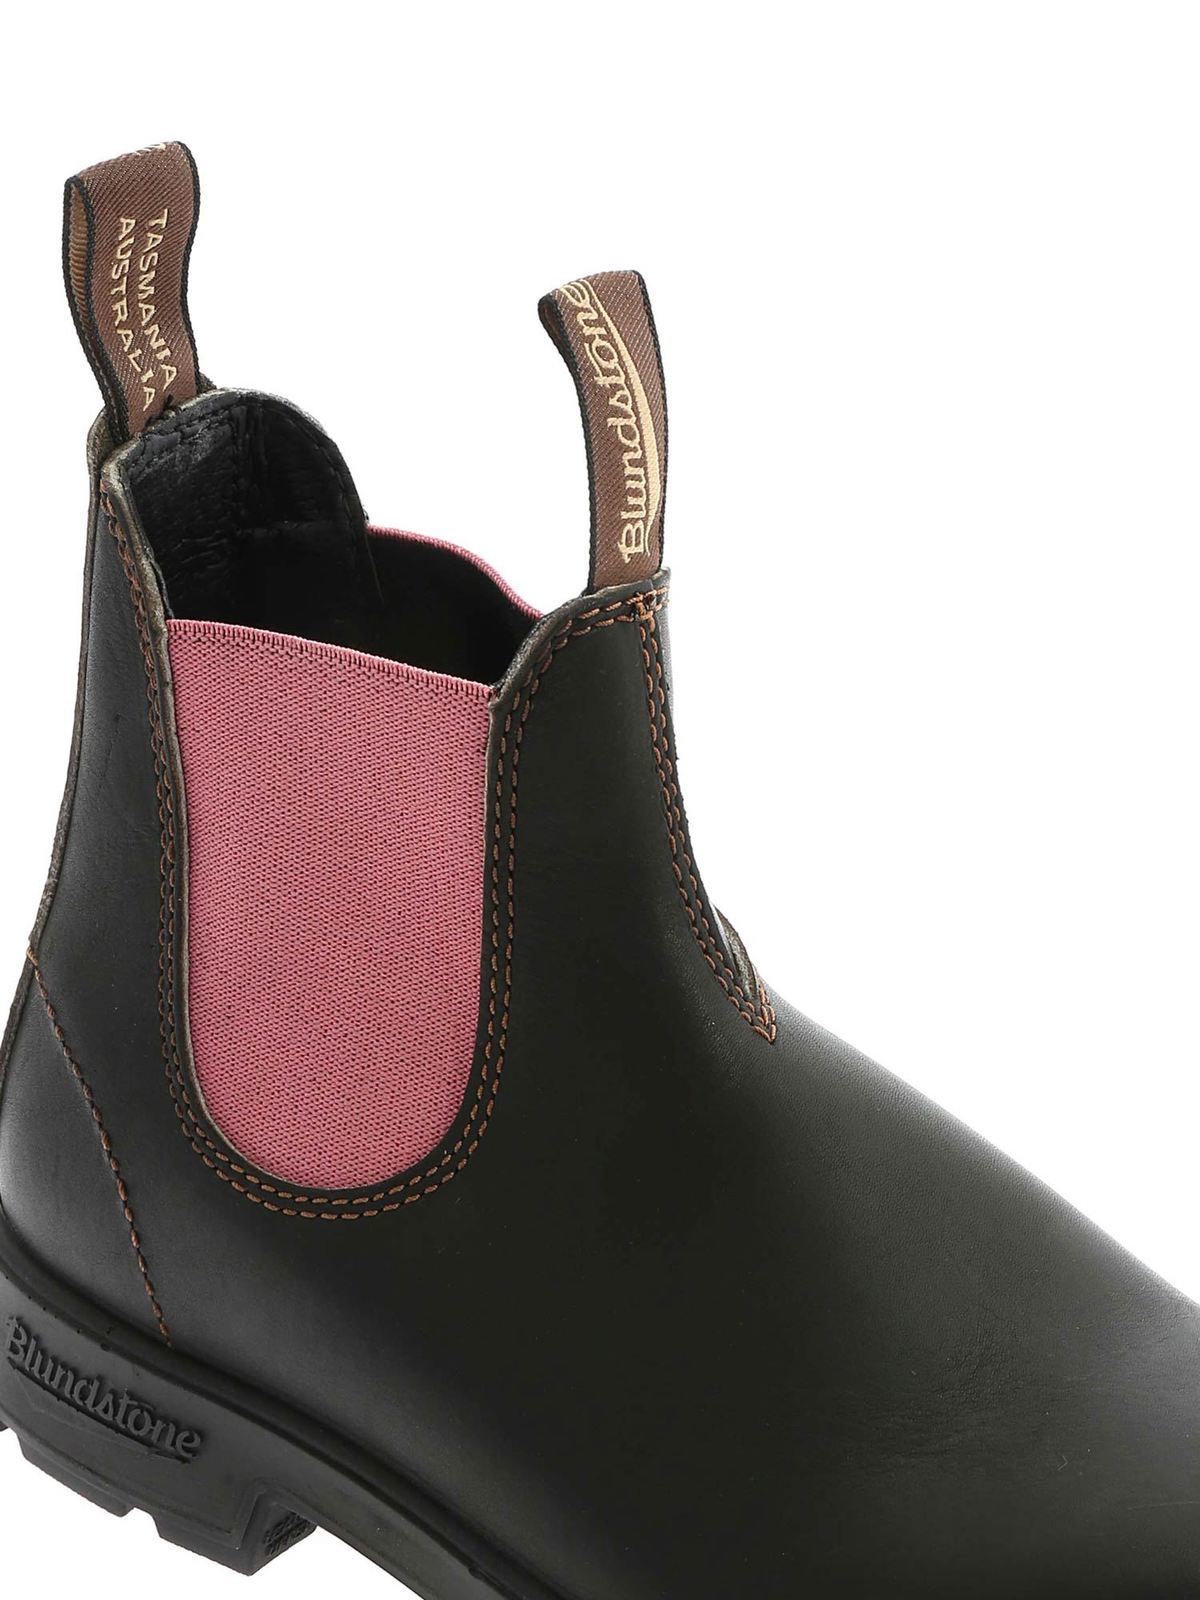 blundstone pink boots